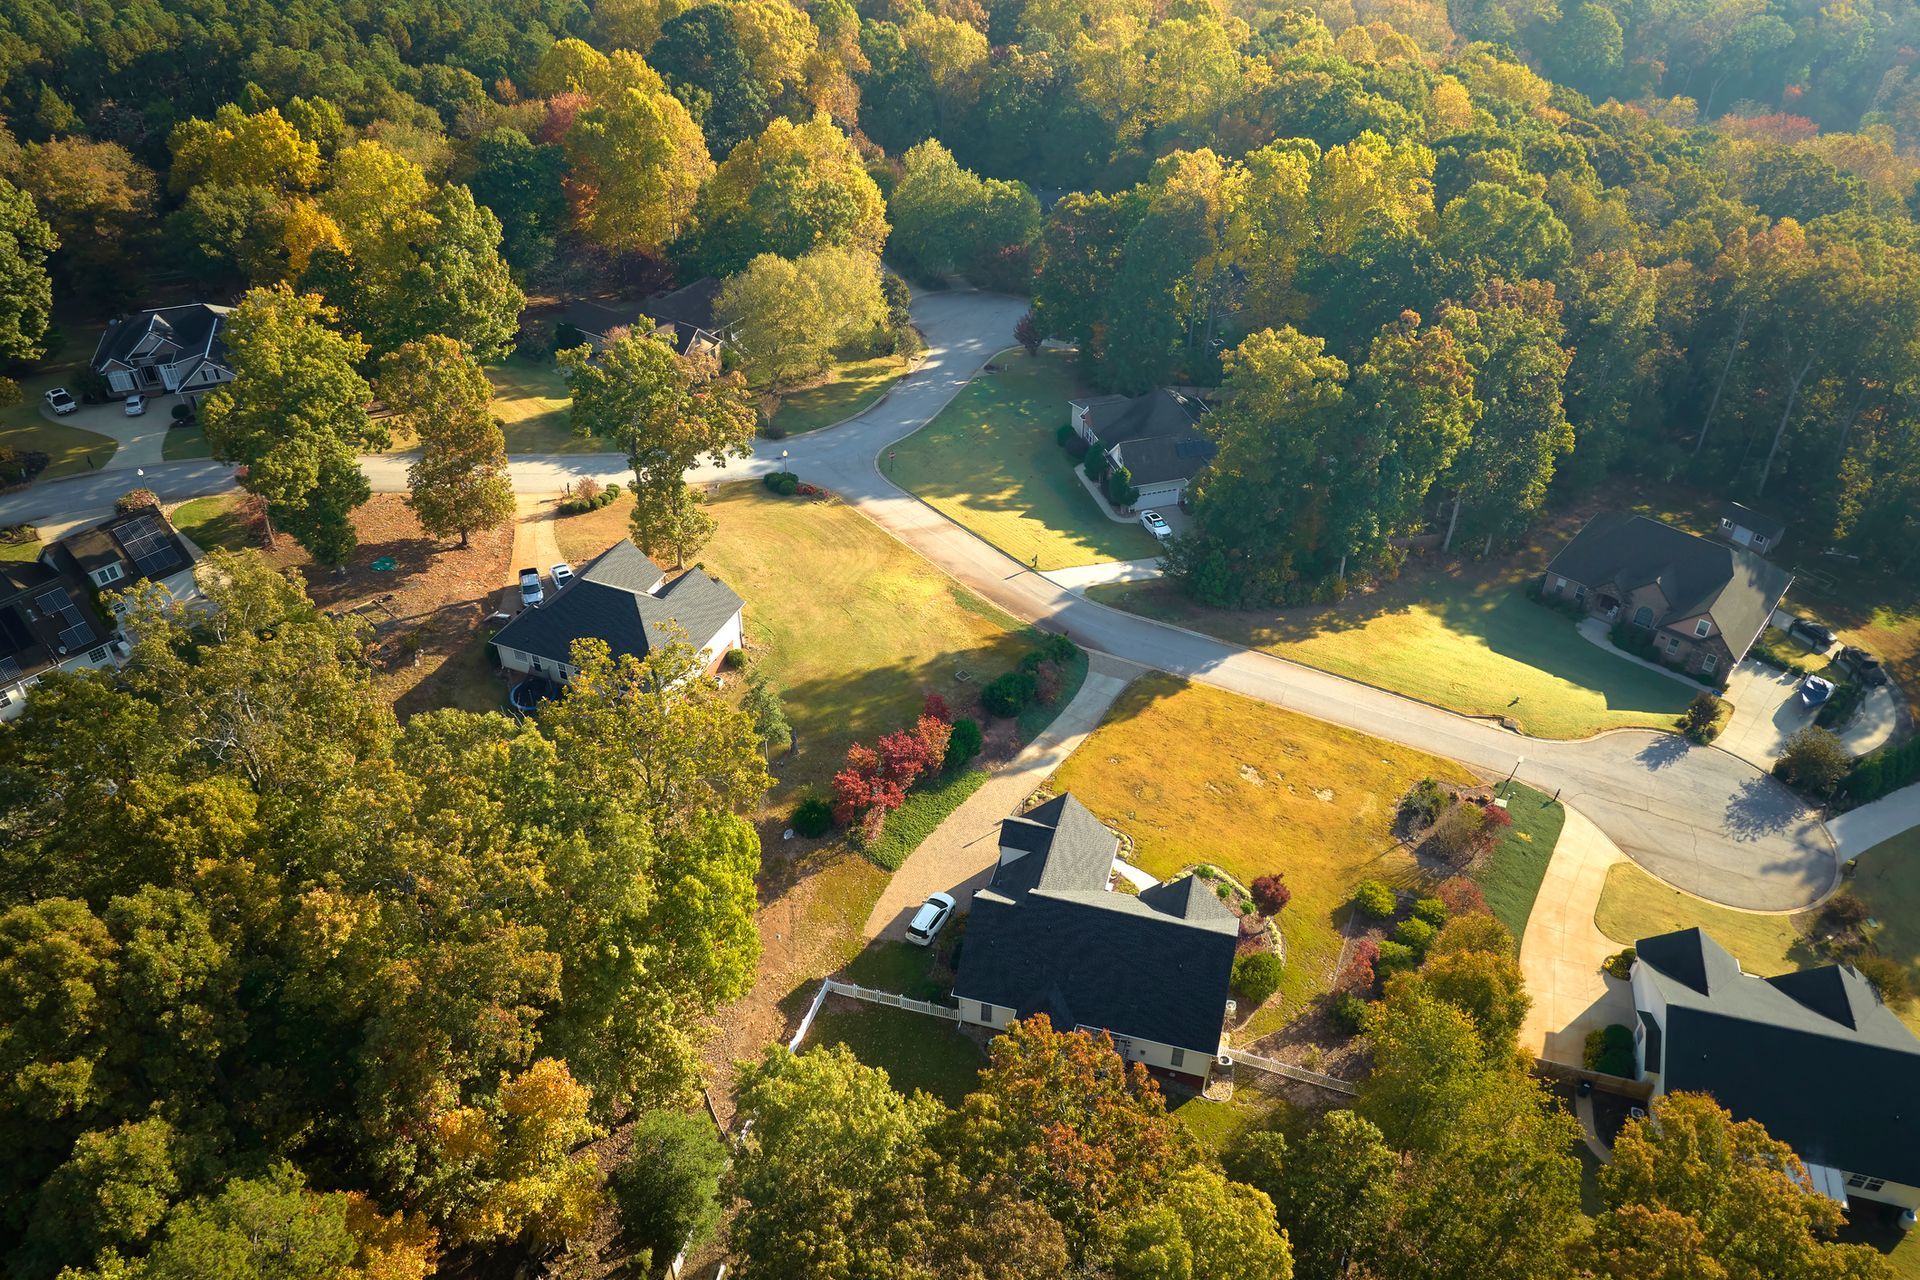 An Aerial View Of A Residential Area Surrounded By Trees - Clemmons, NC - Jetco Septic Service